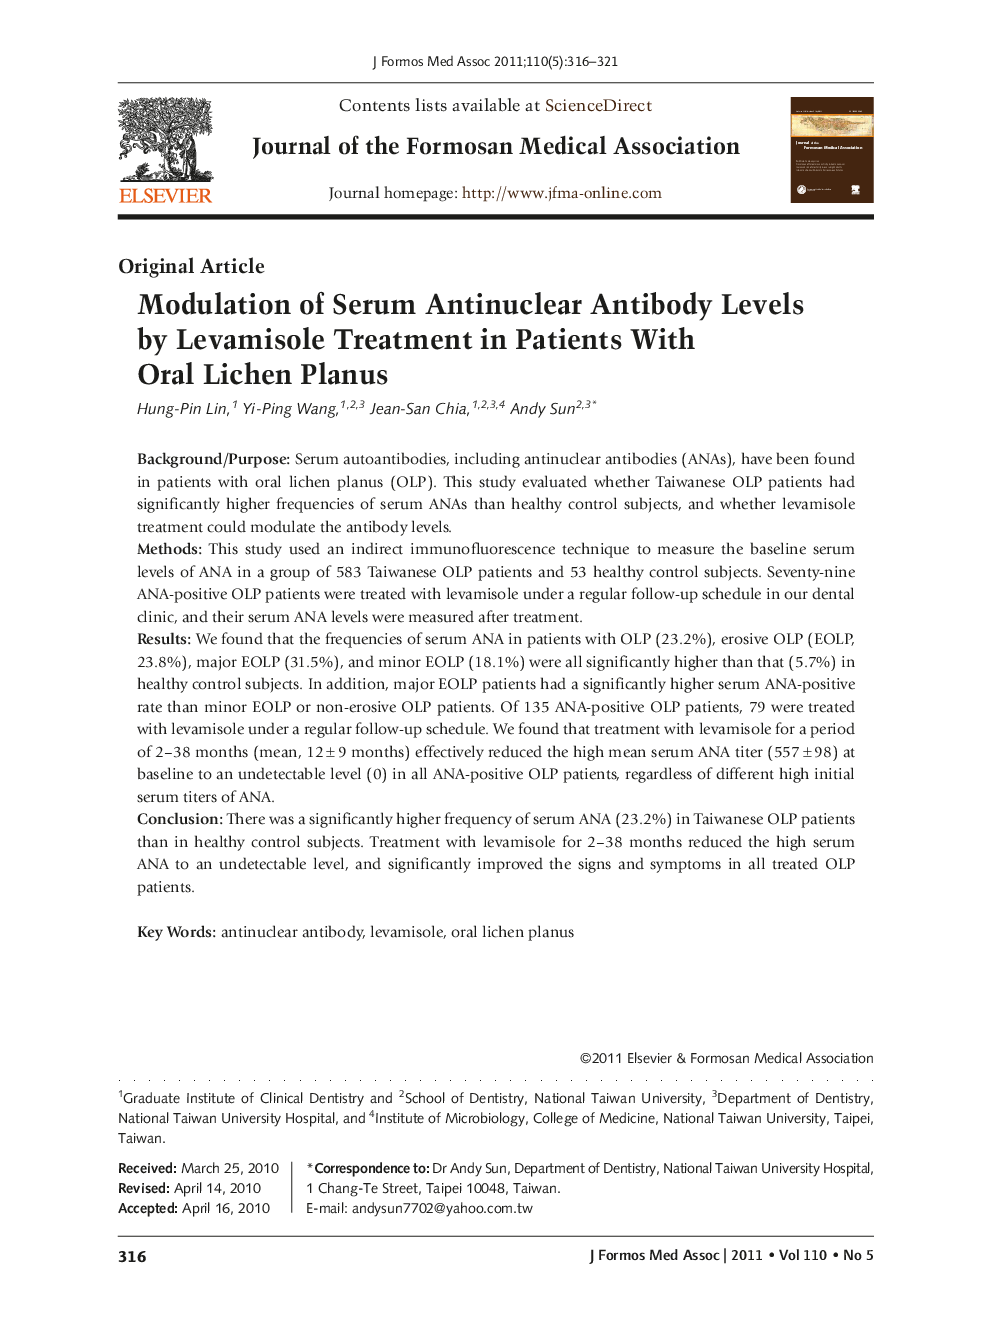 Modulation of Serum Antinuclear Antibody Levels by Levamisole Treatment in Patients With Oral Lichen Planus